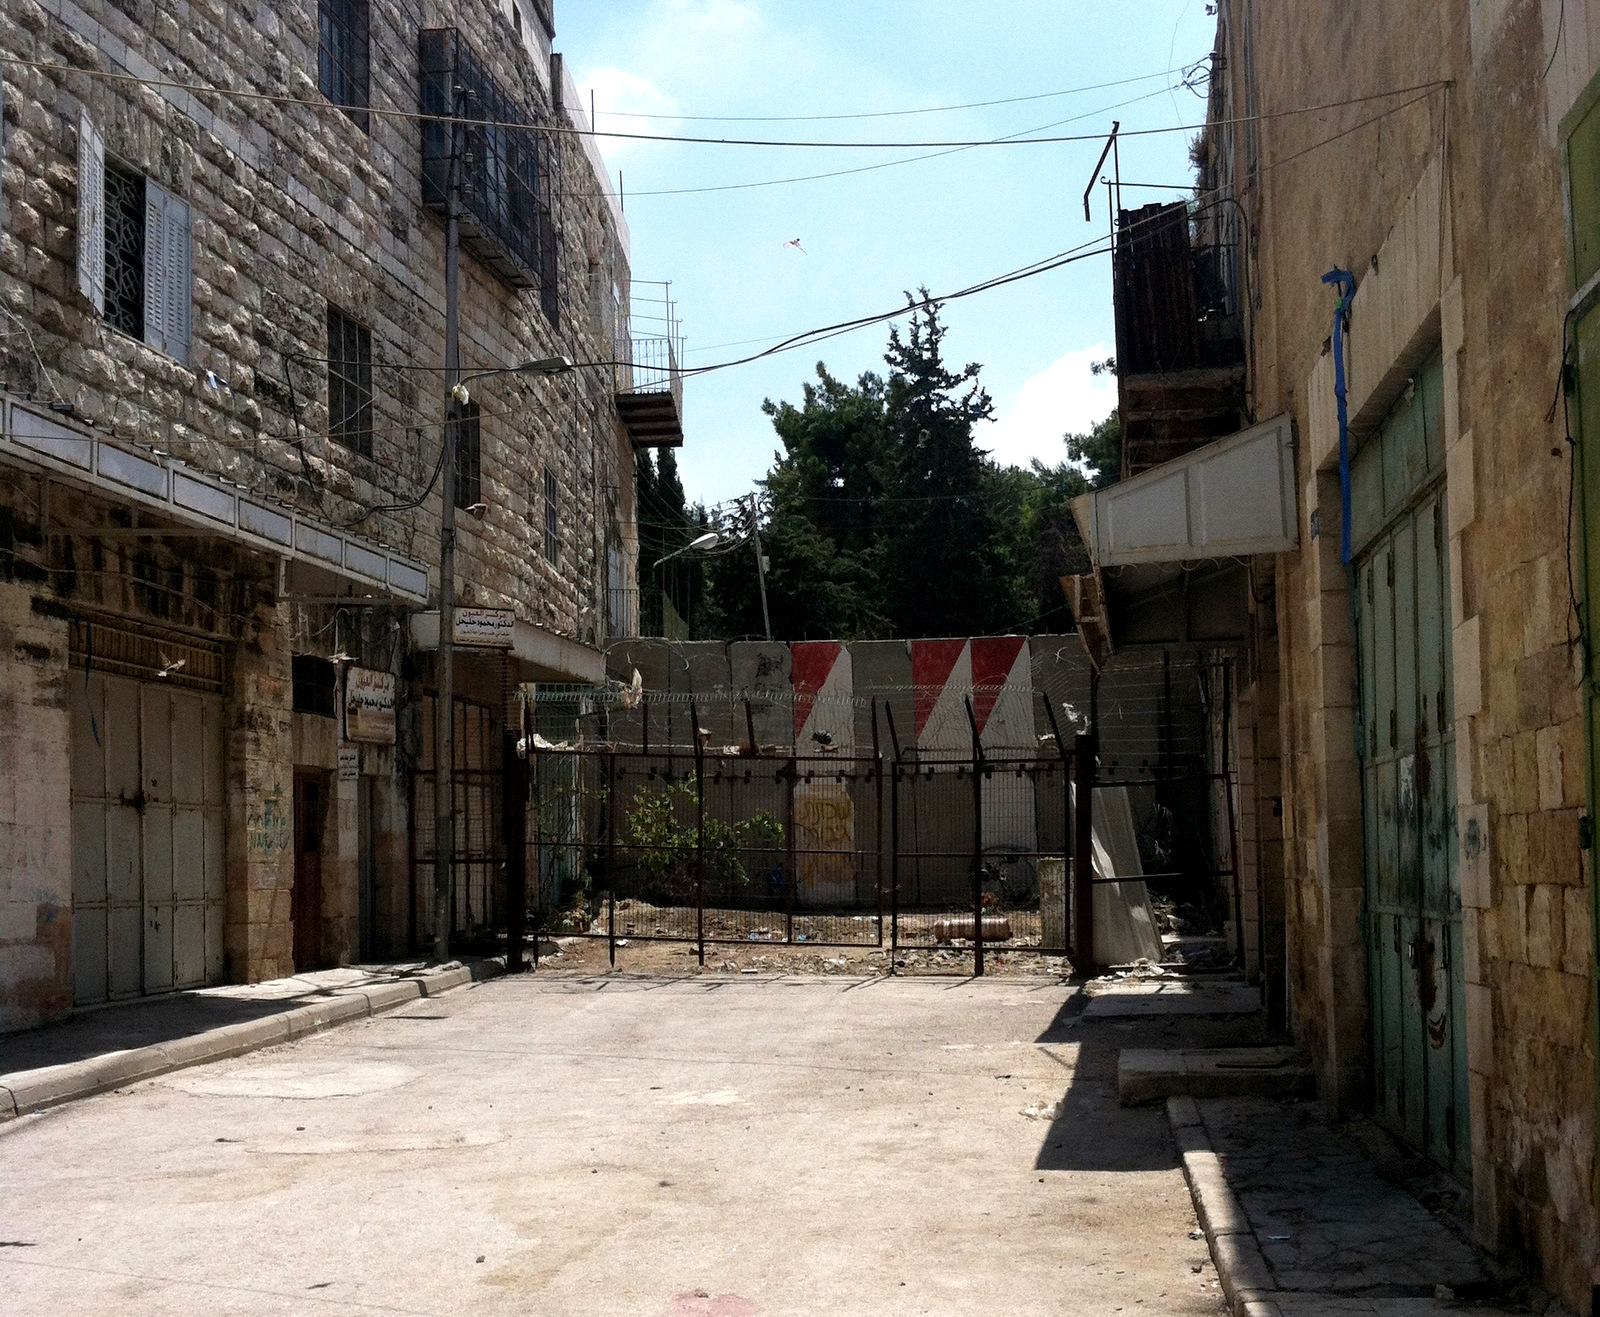 A neighborhood near the Ibrahimi Mosque in Hebron. The broad side of the street is for Jews and narrow side for Muslims. (Photo: Miko Peled)